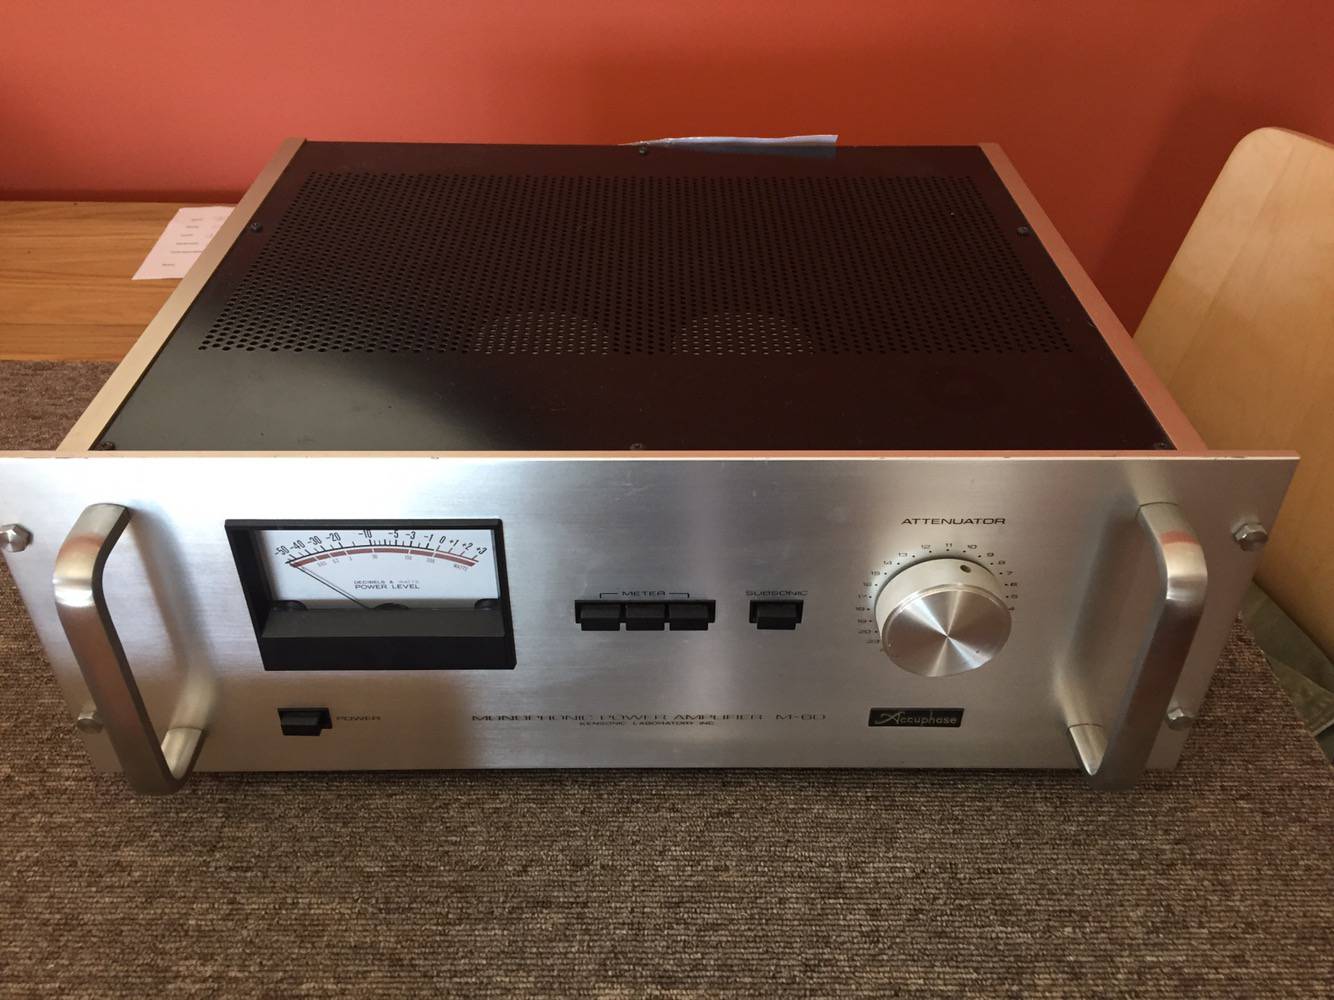 Accuphase M-60